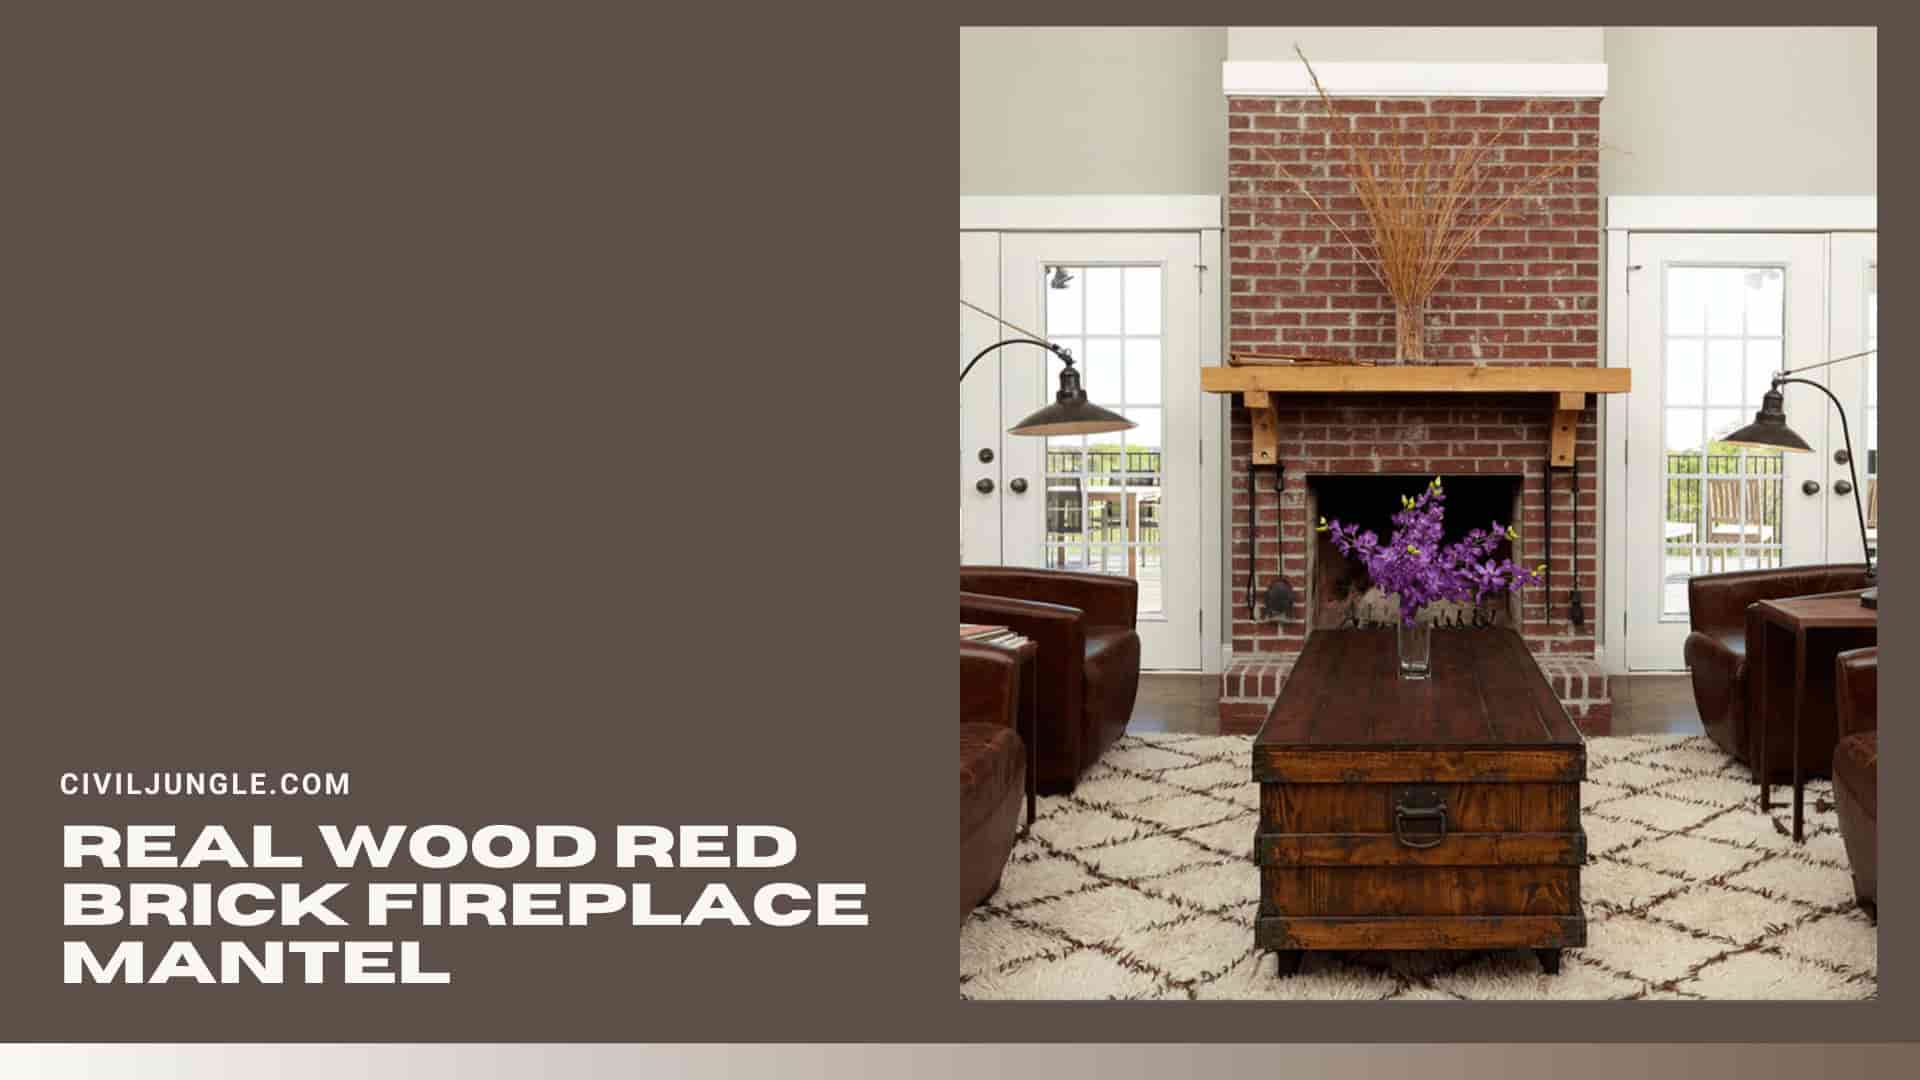 Real Wood Red Brick Fireplace Mantel